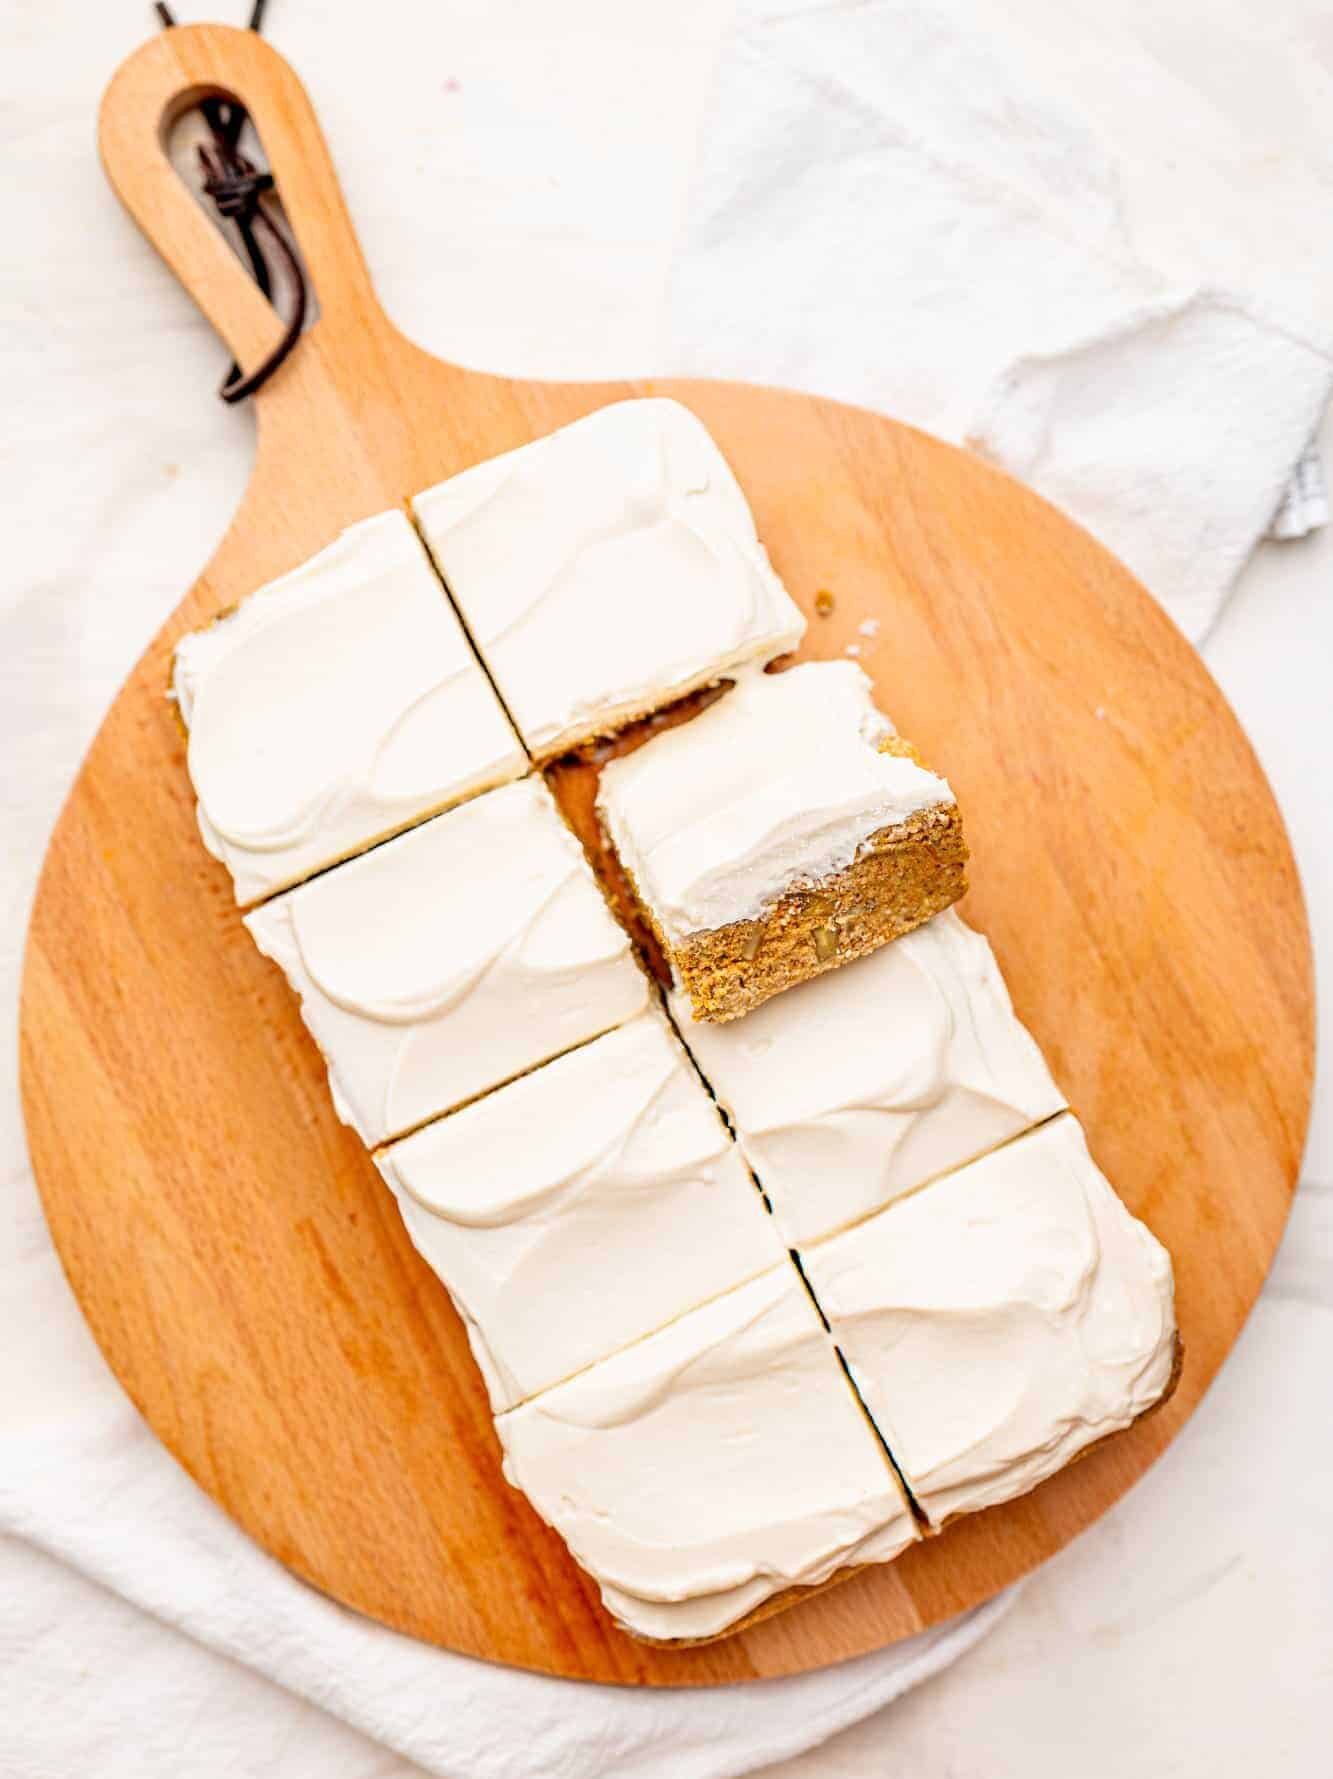 No-bake Carrot Cake Bars on a wooden board.